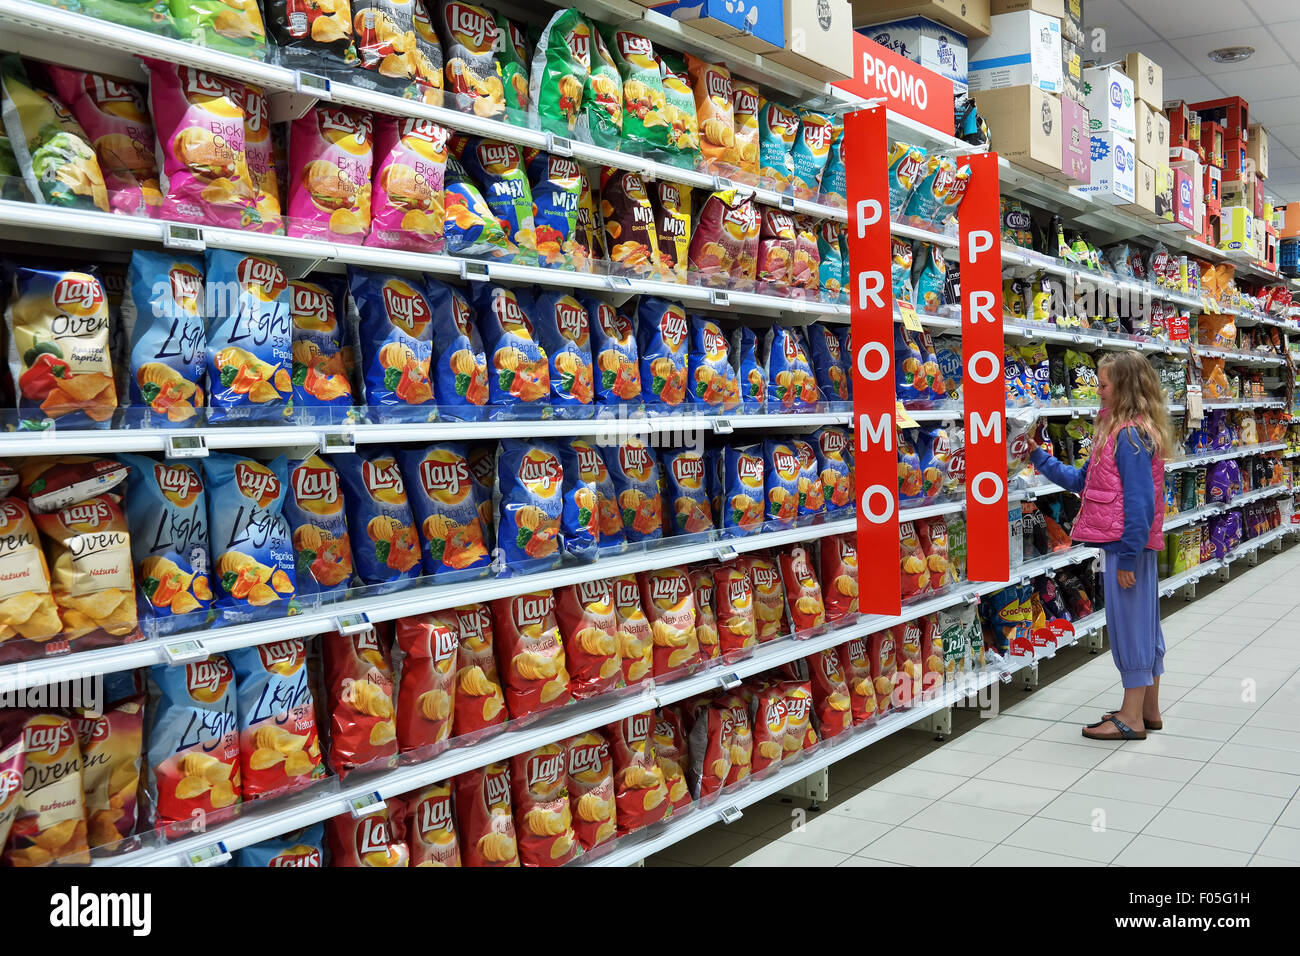 Snack Food Aisle In A Supermarket Stock Photo Royalty Free Image